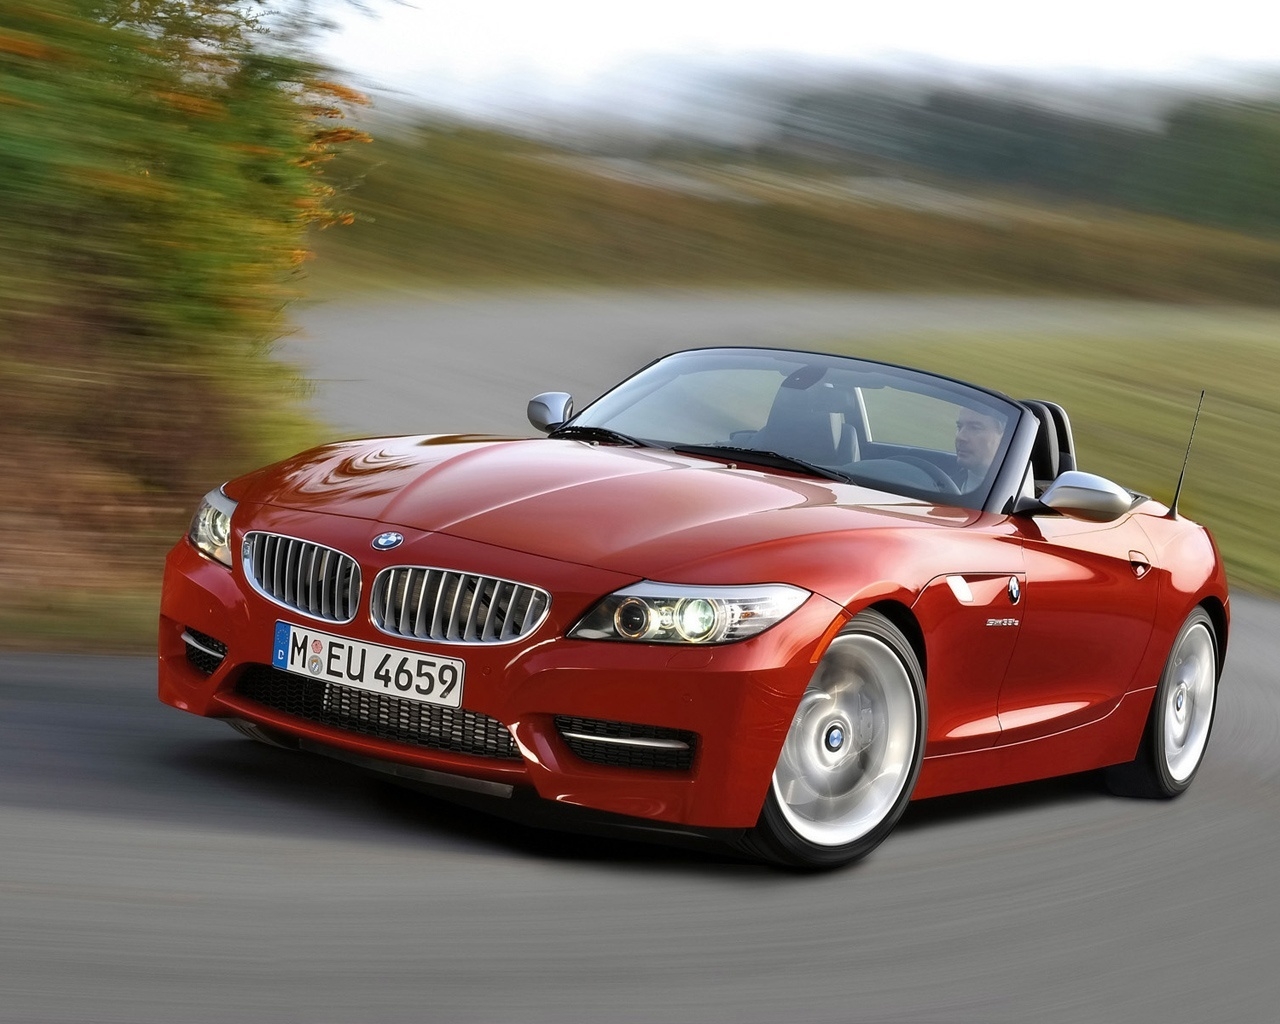 BMW Z4 sDrive35is 2010 for 1280 x 1024 resolution